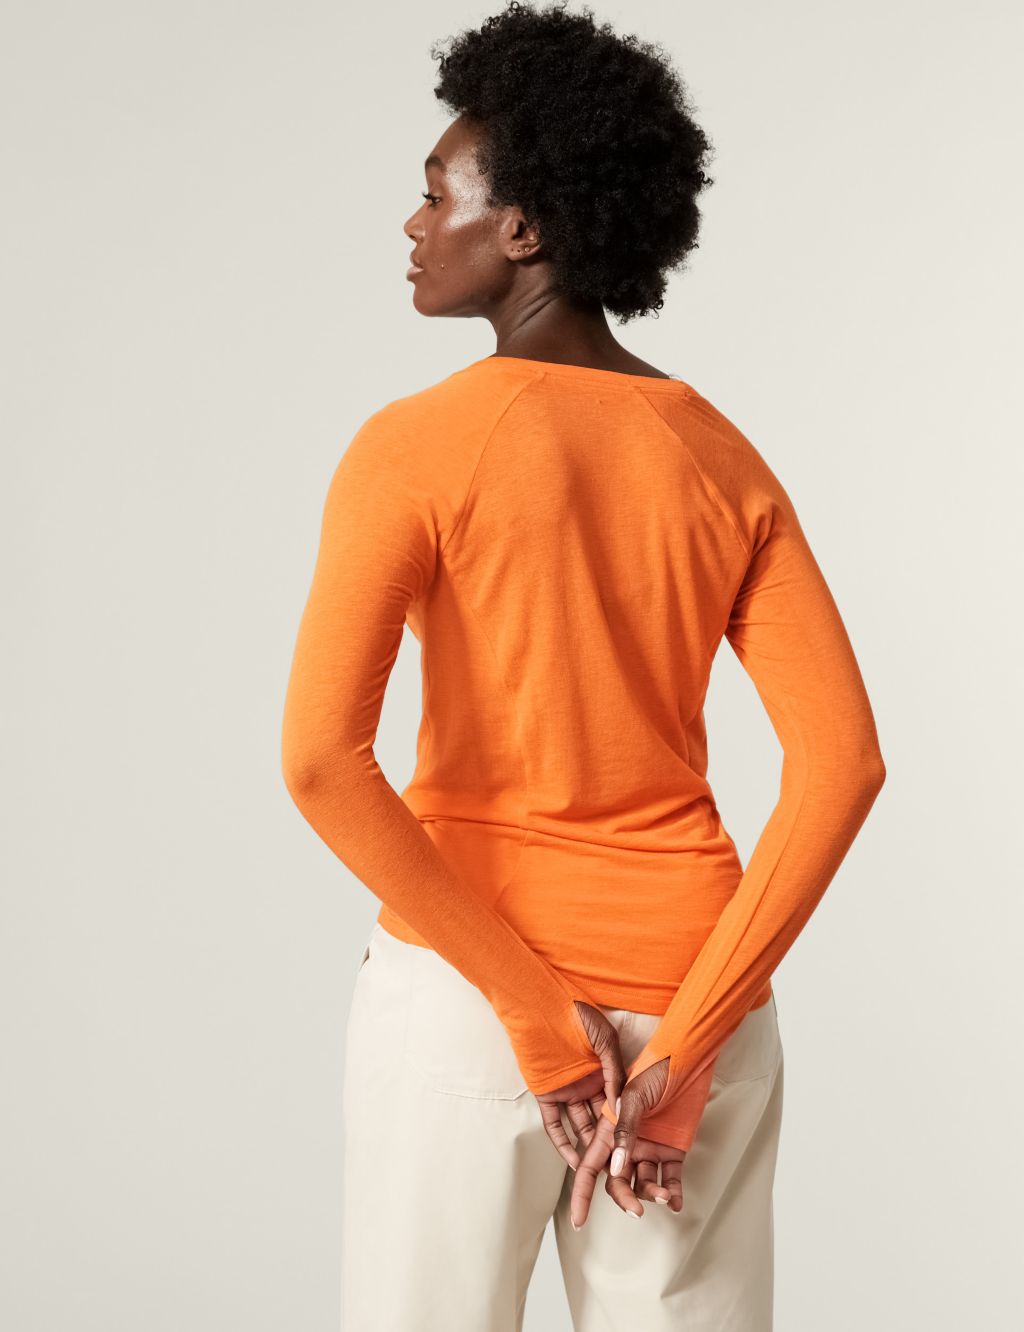 Lightweight Base Layer Fitted Top image 4